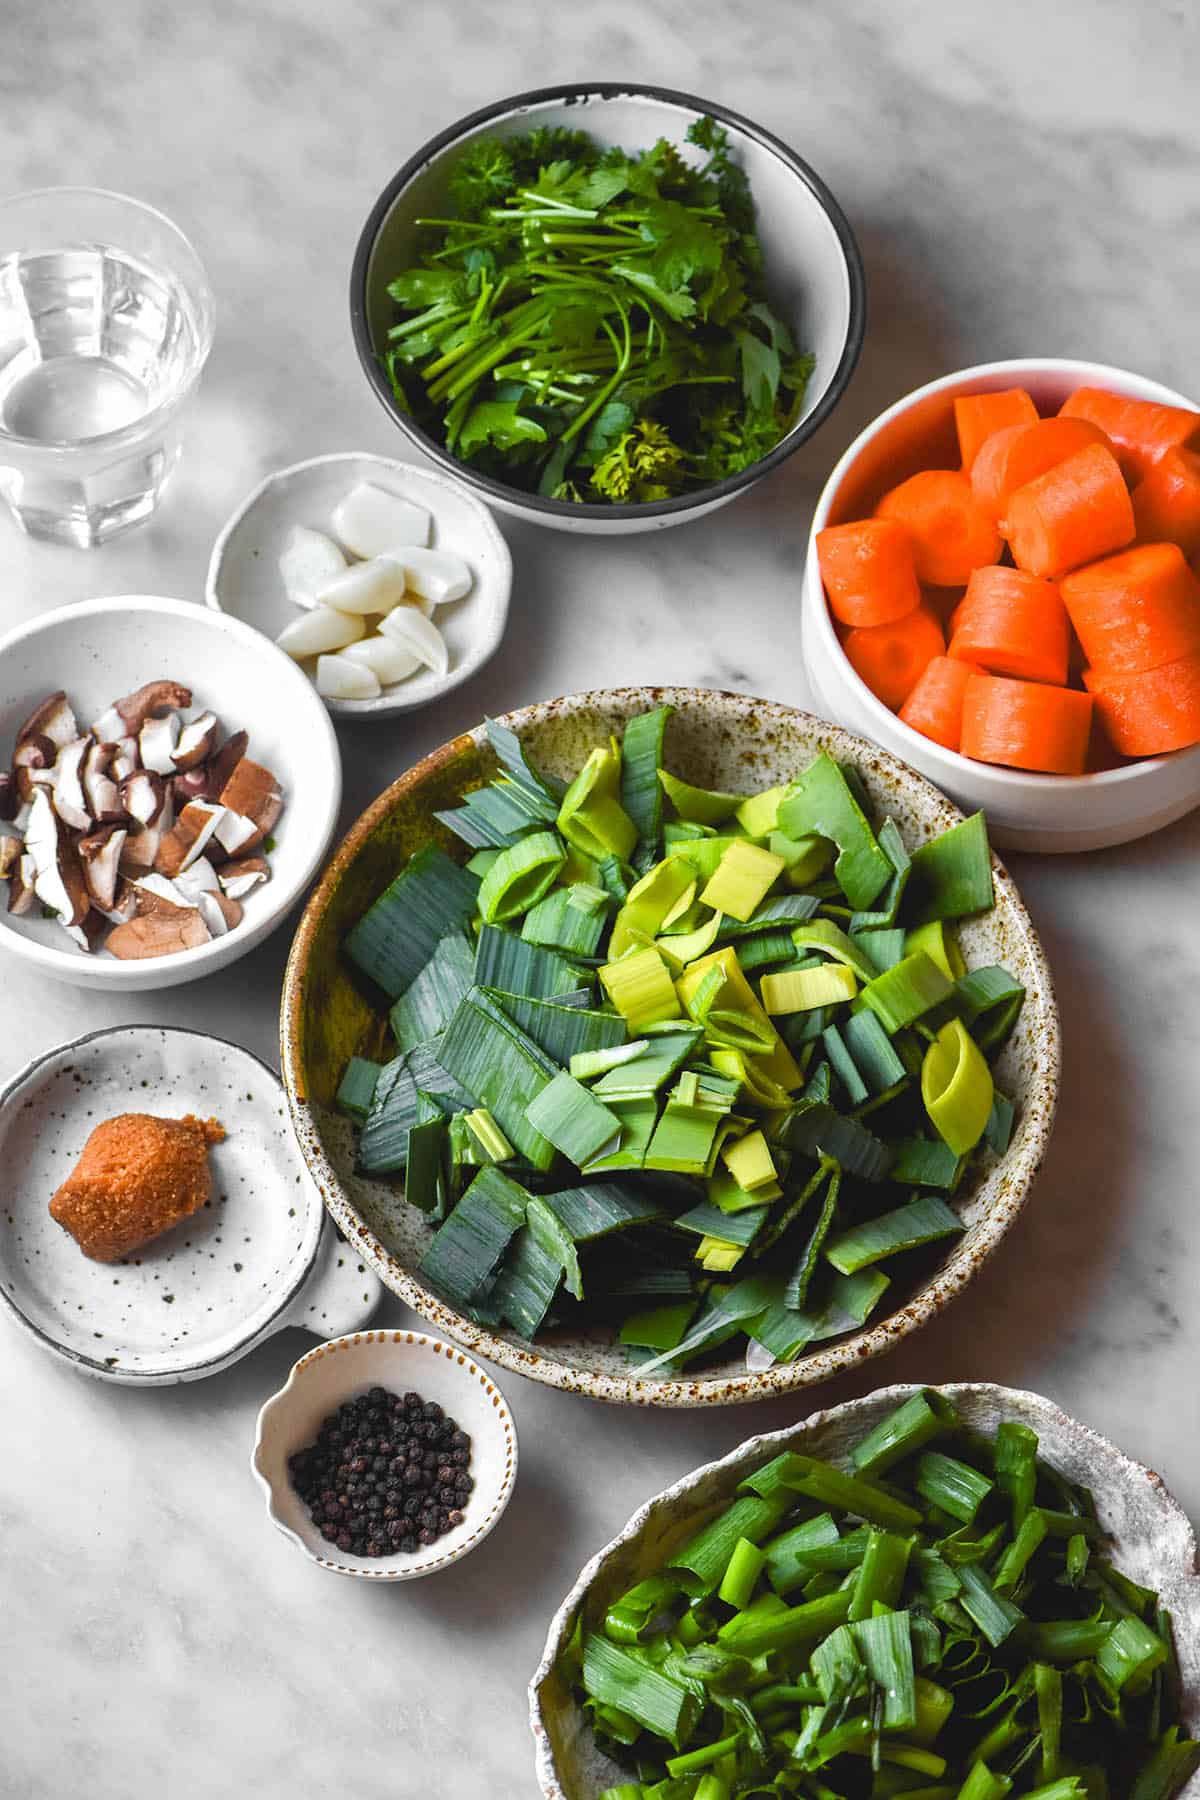 An aerial image of the ingredients to make a low FODMAP vegetable stock arranged in various sized bowls on a white marble table